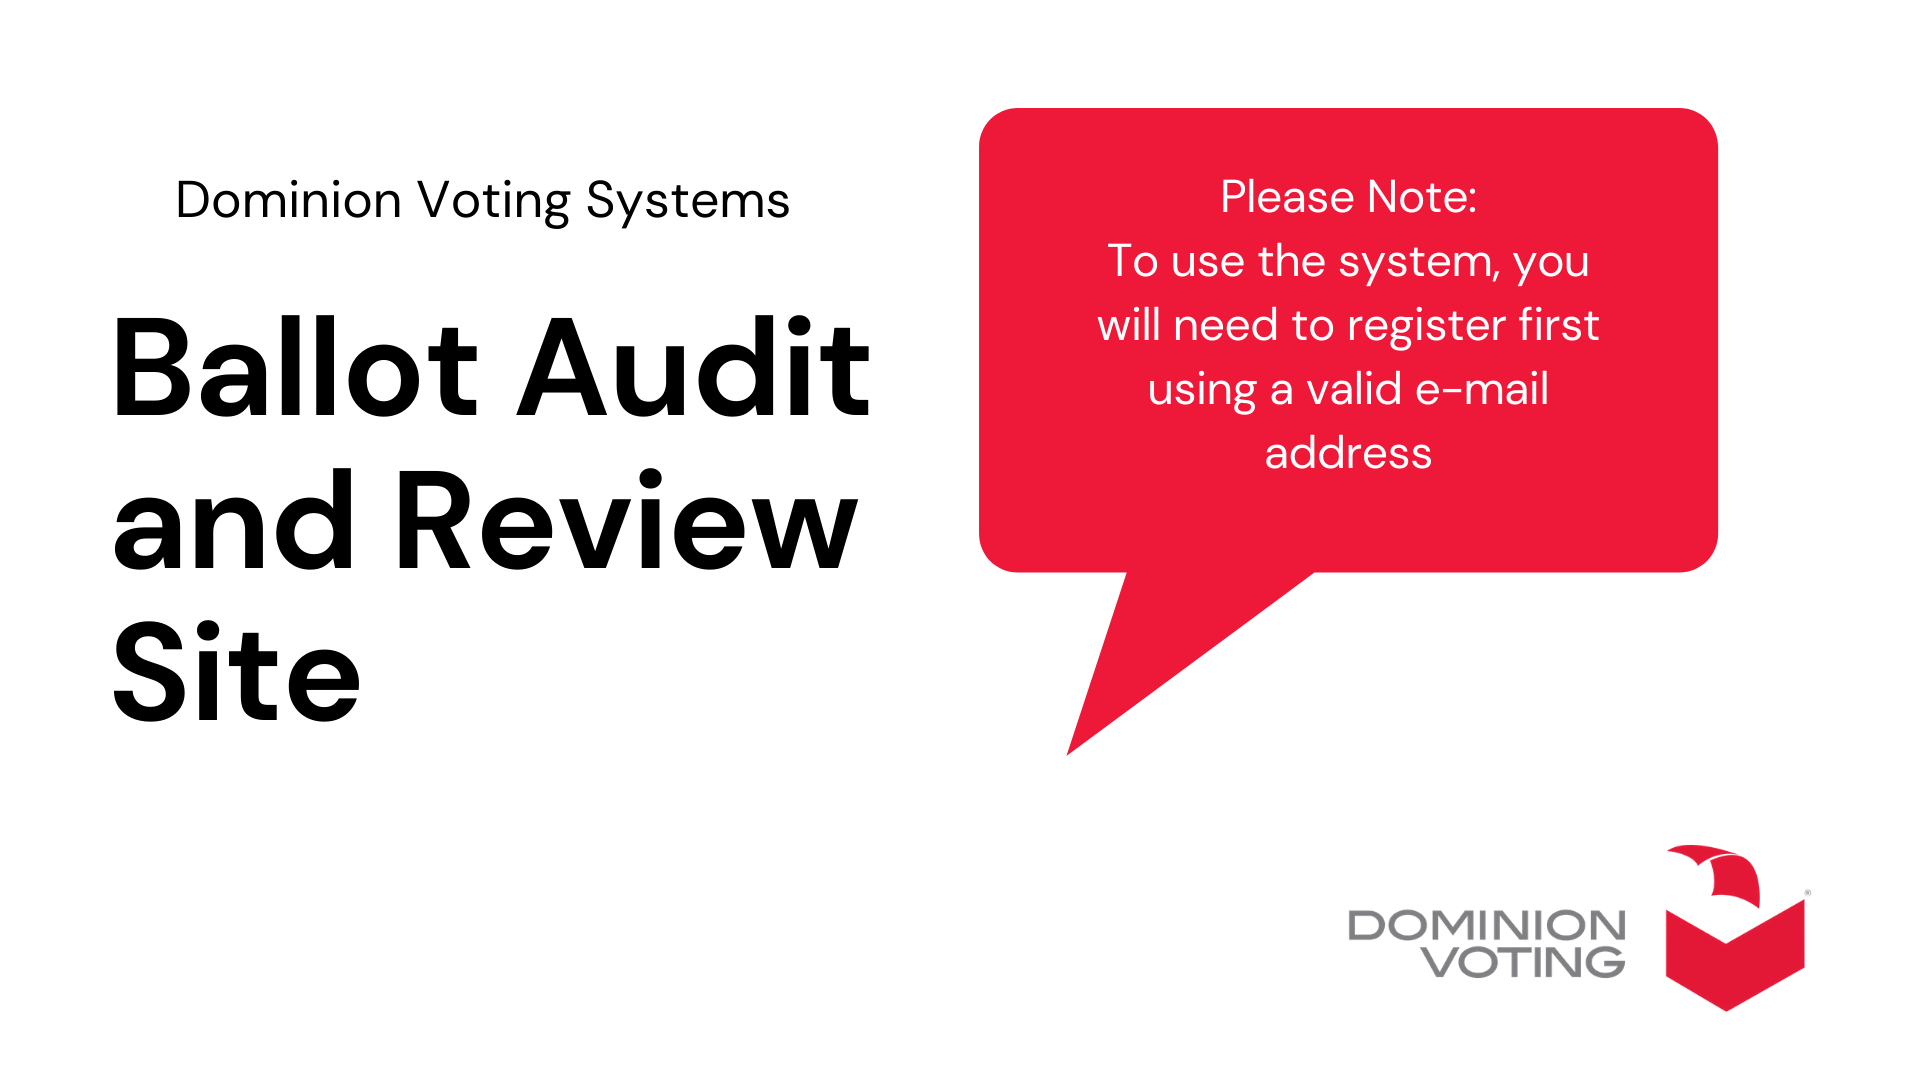 Ballot Audit and Review Site. To use the system you will need to register with a valid email address